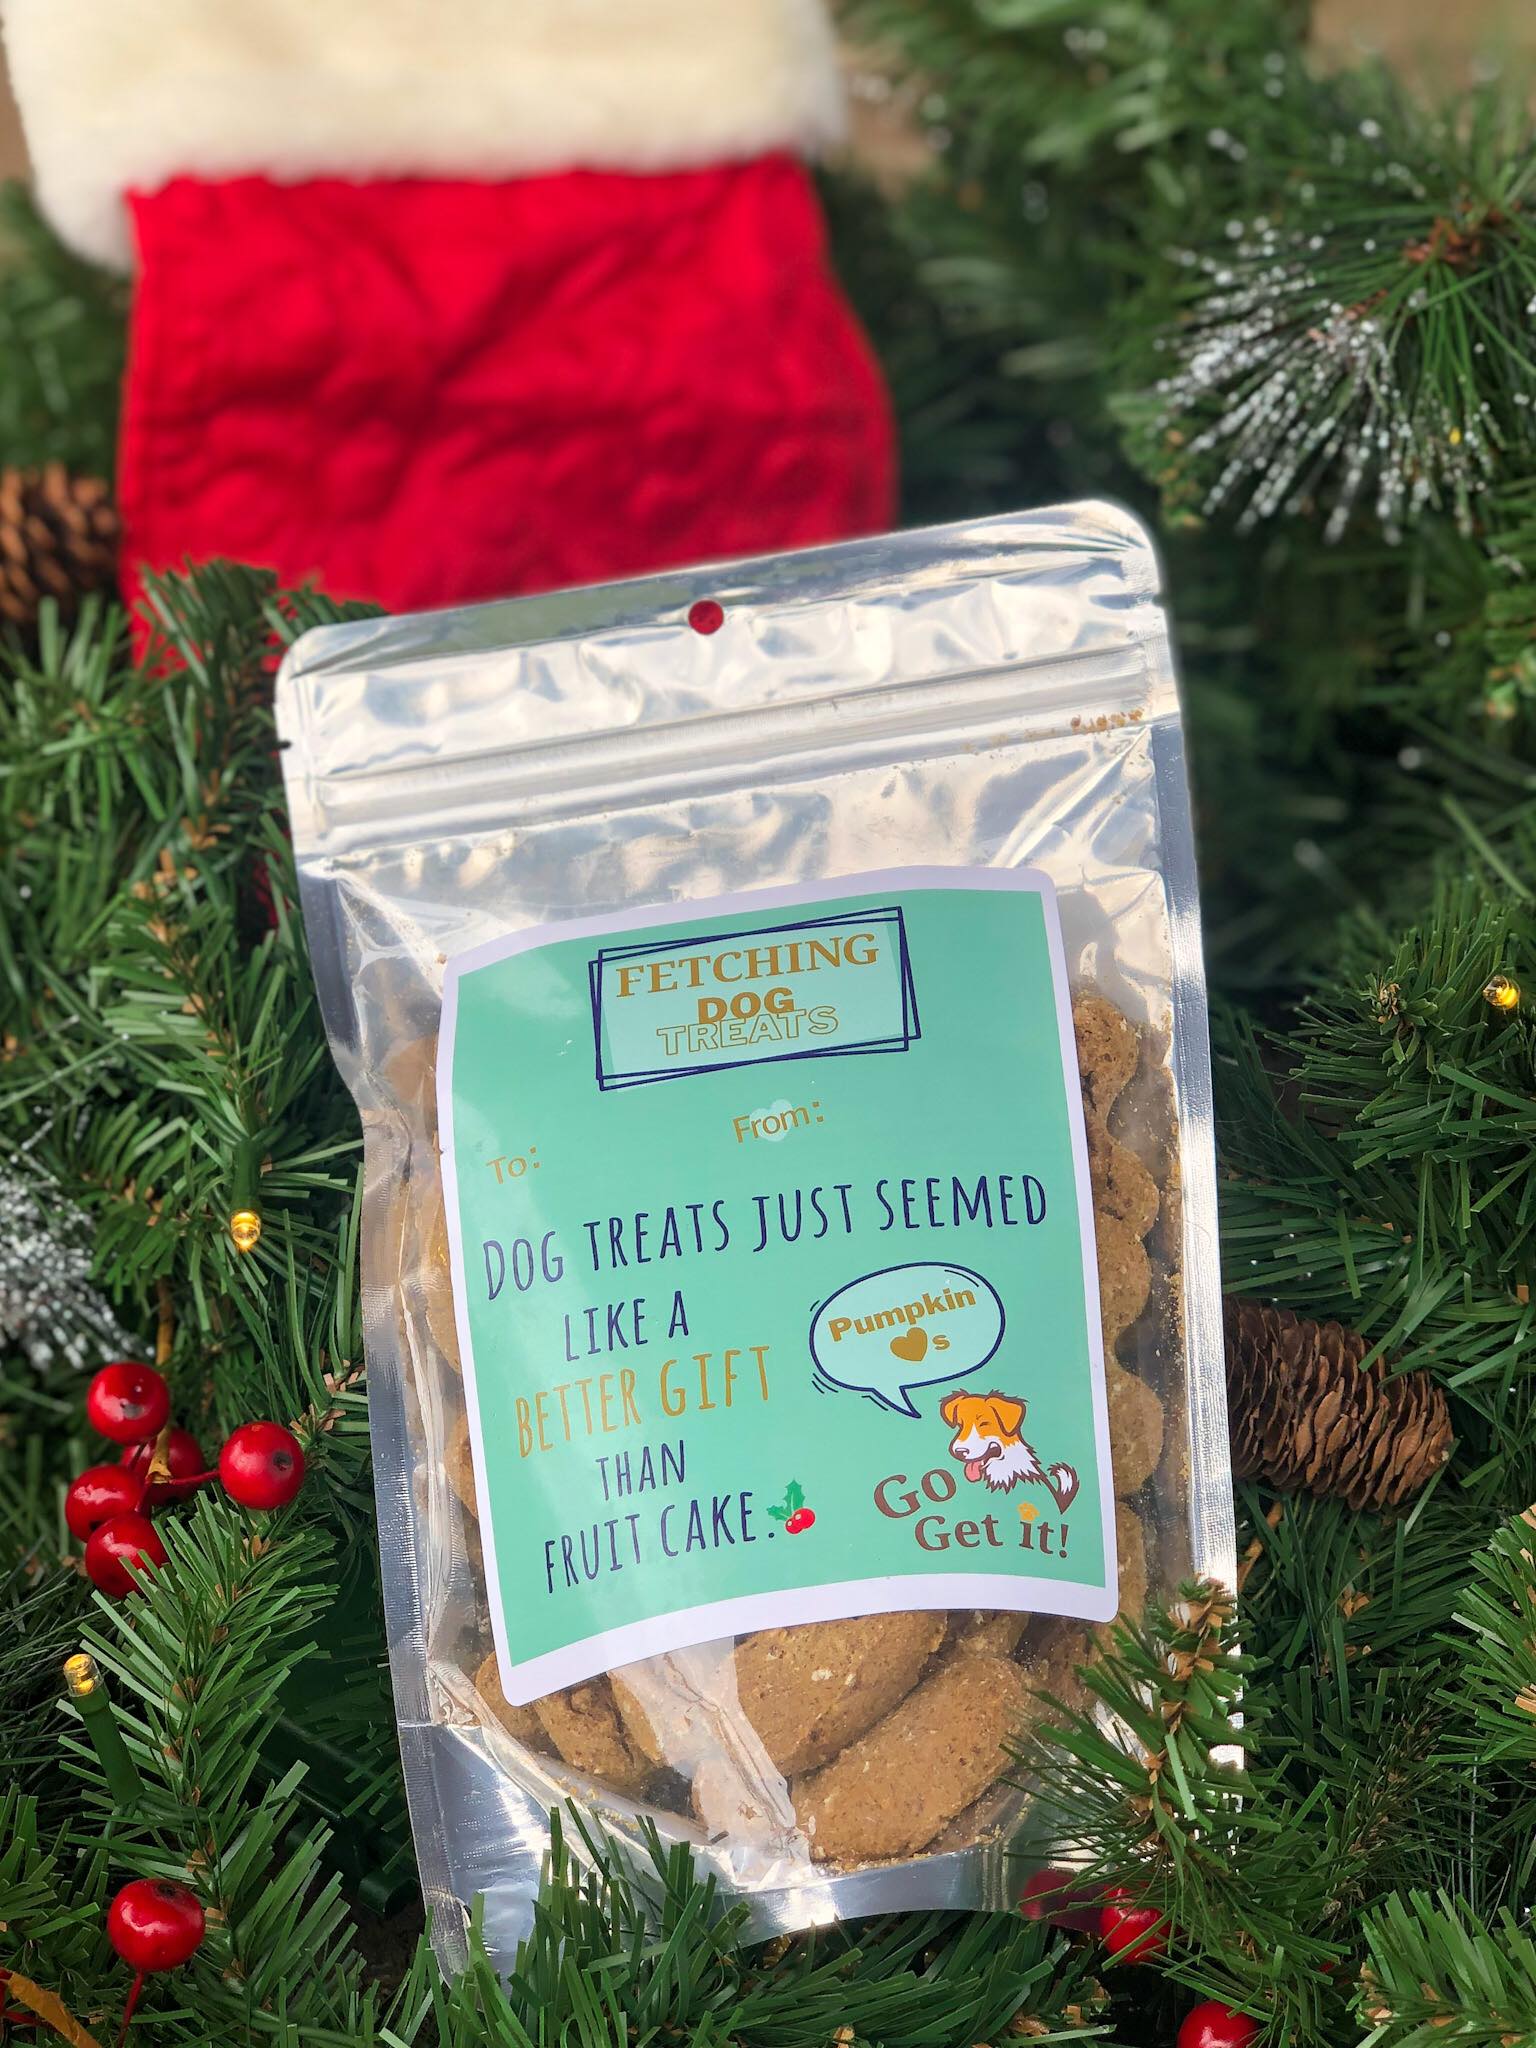 Fetching Apparel has giftable dog treats with fun messages! We donate 20% of profits to animal rescues!